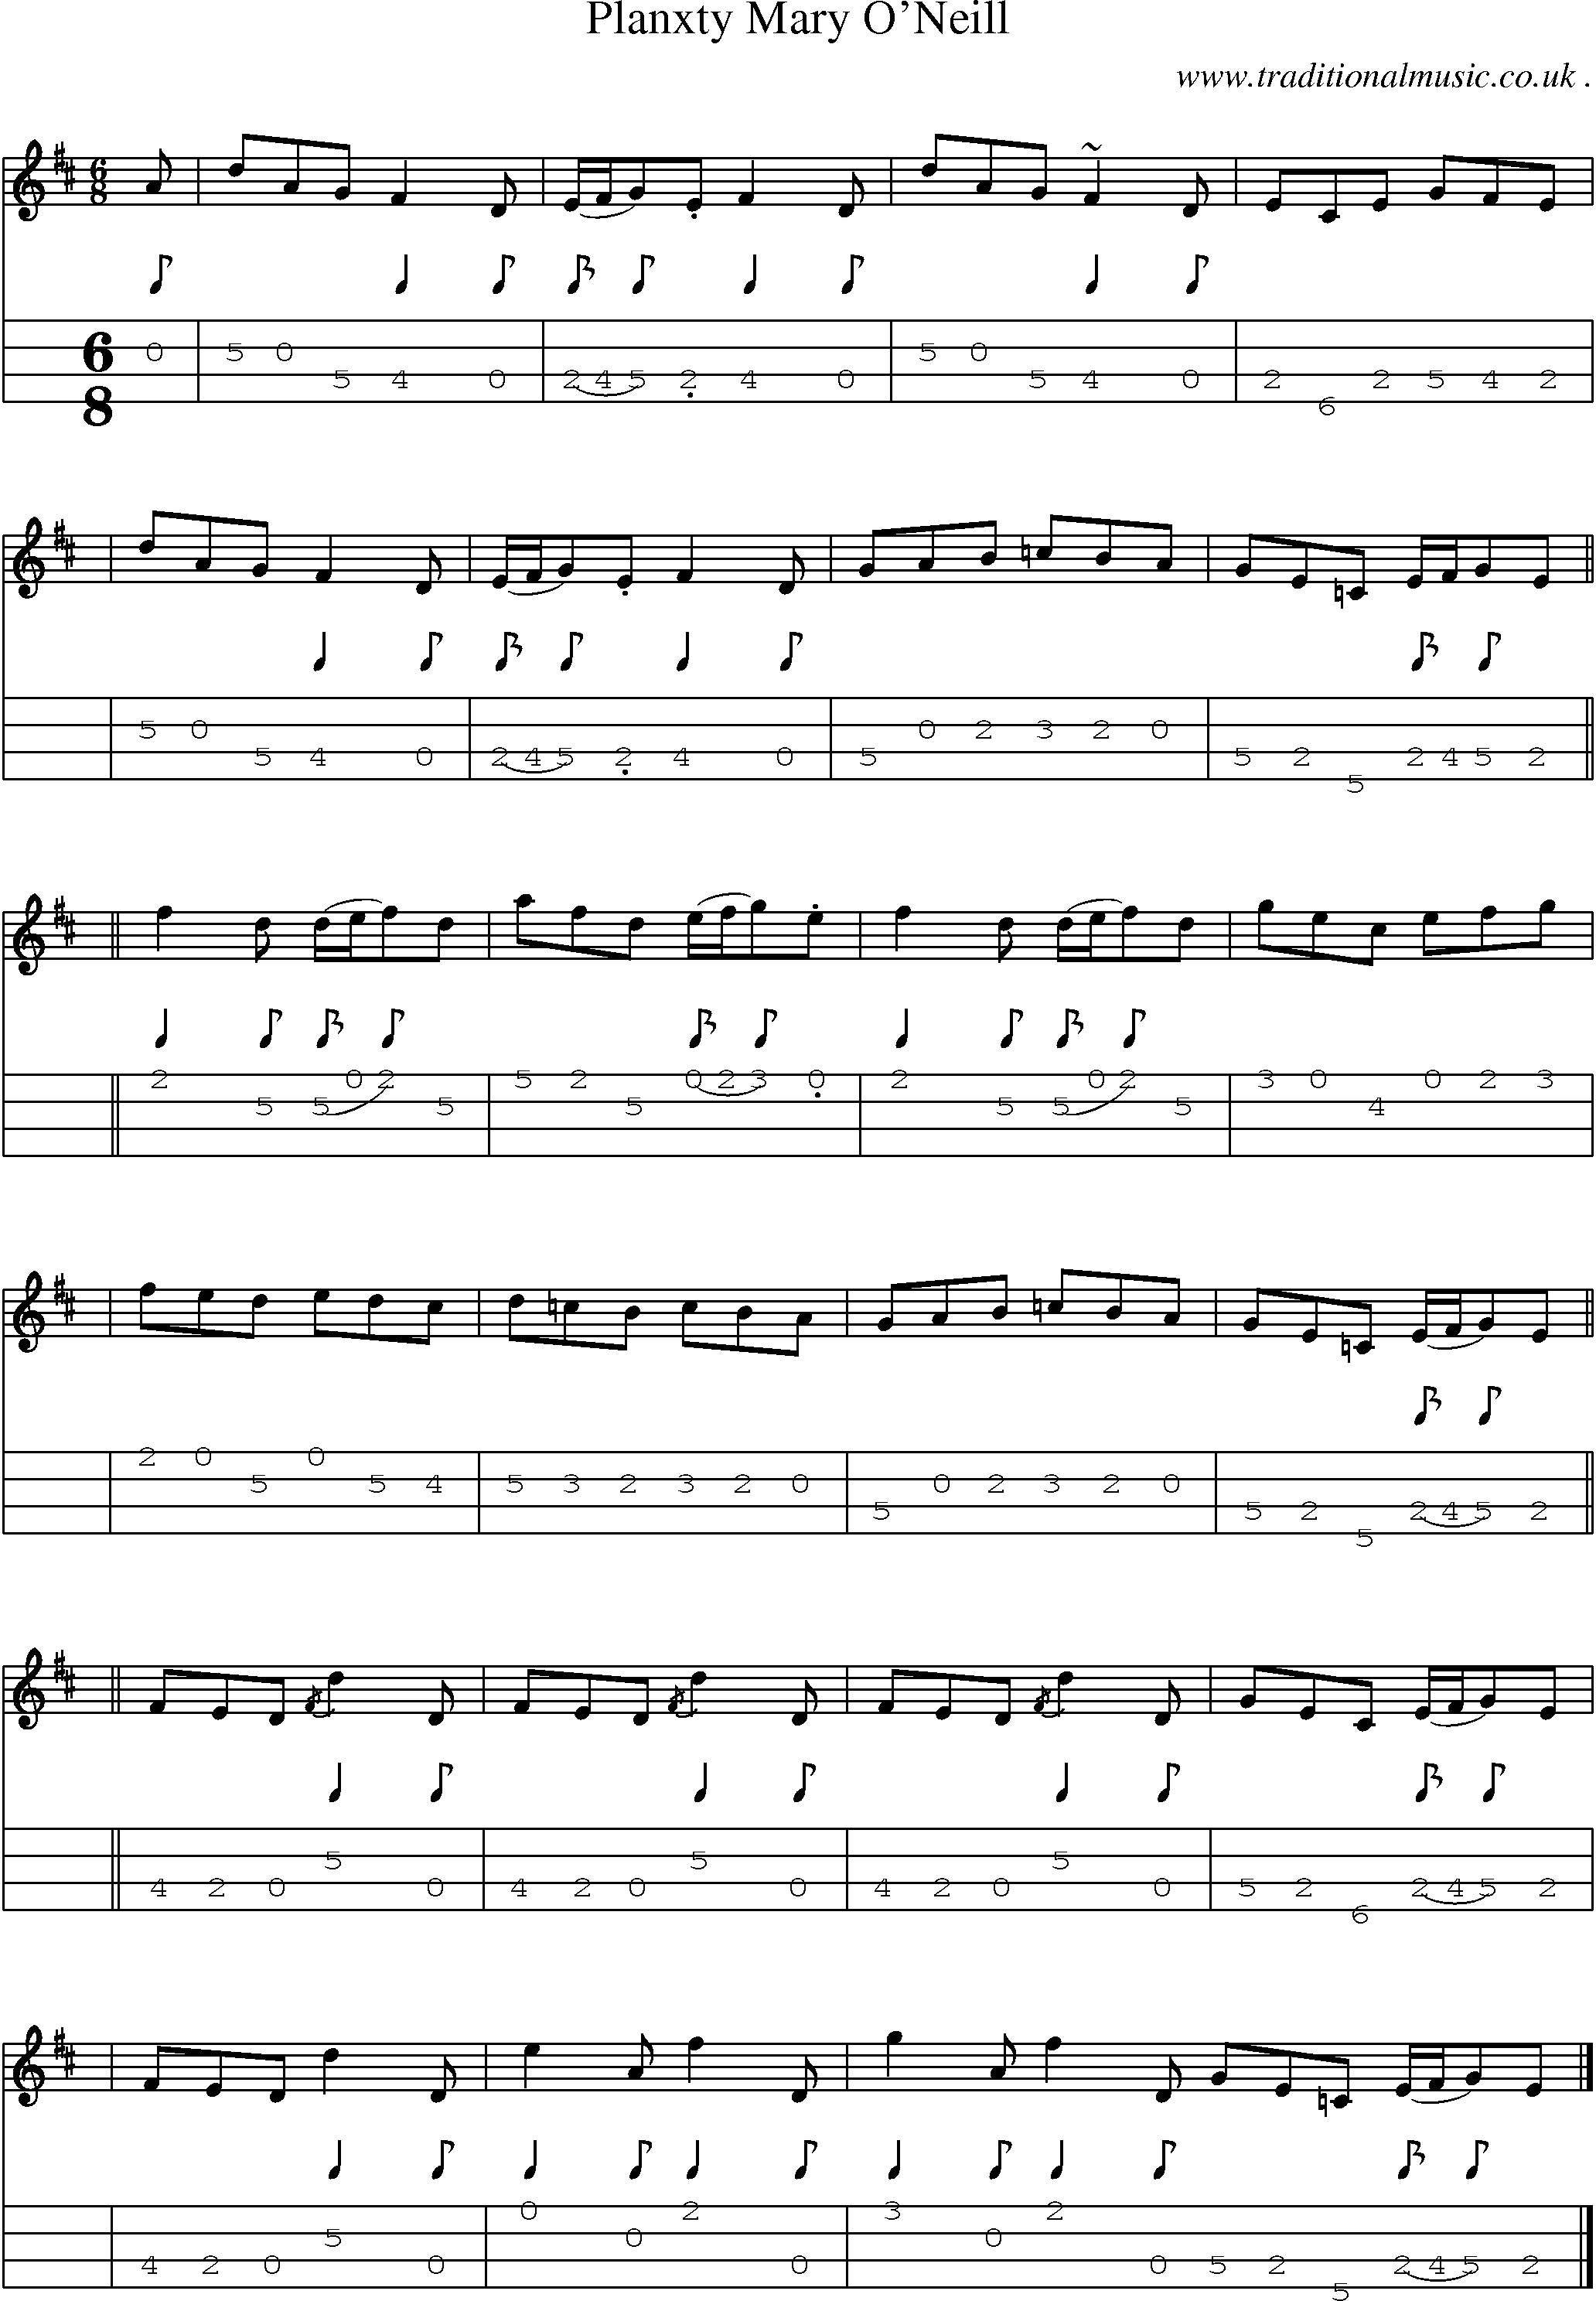 Sheet-music  score, Chords and Mandolin Tabs for Planxty Mary Oneill